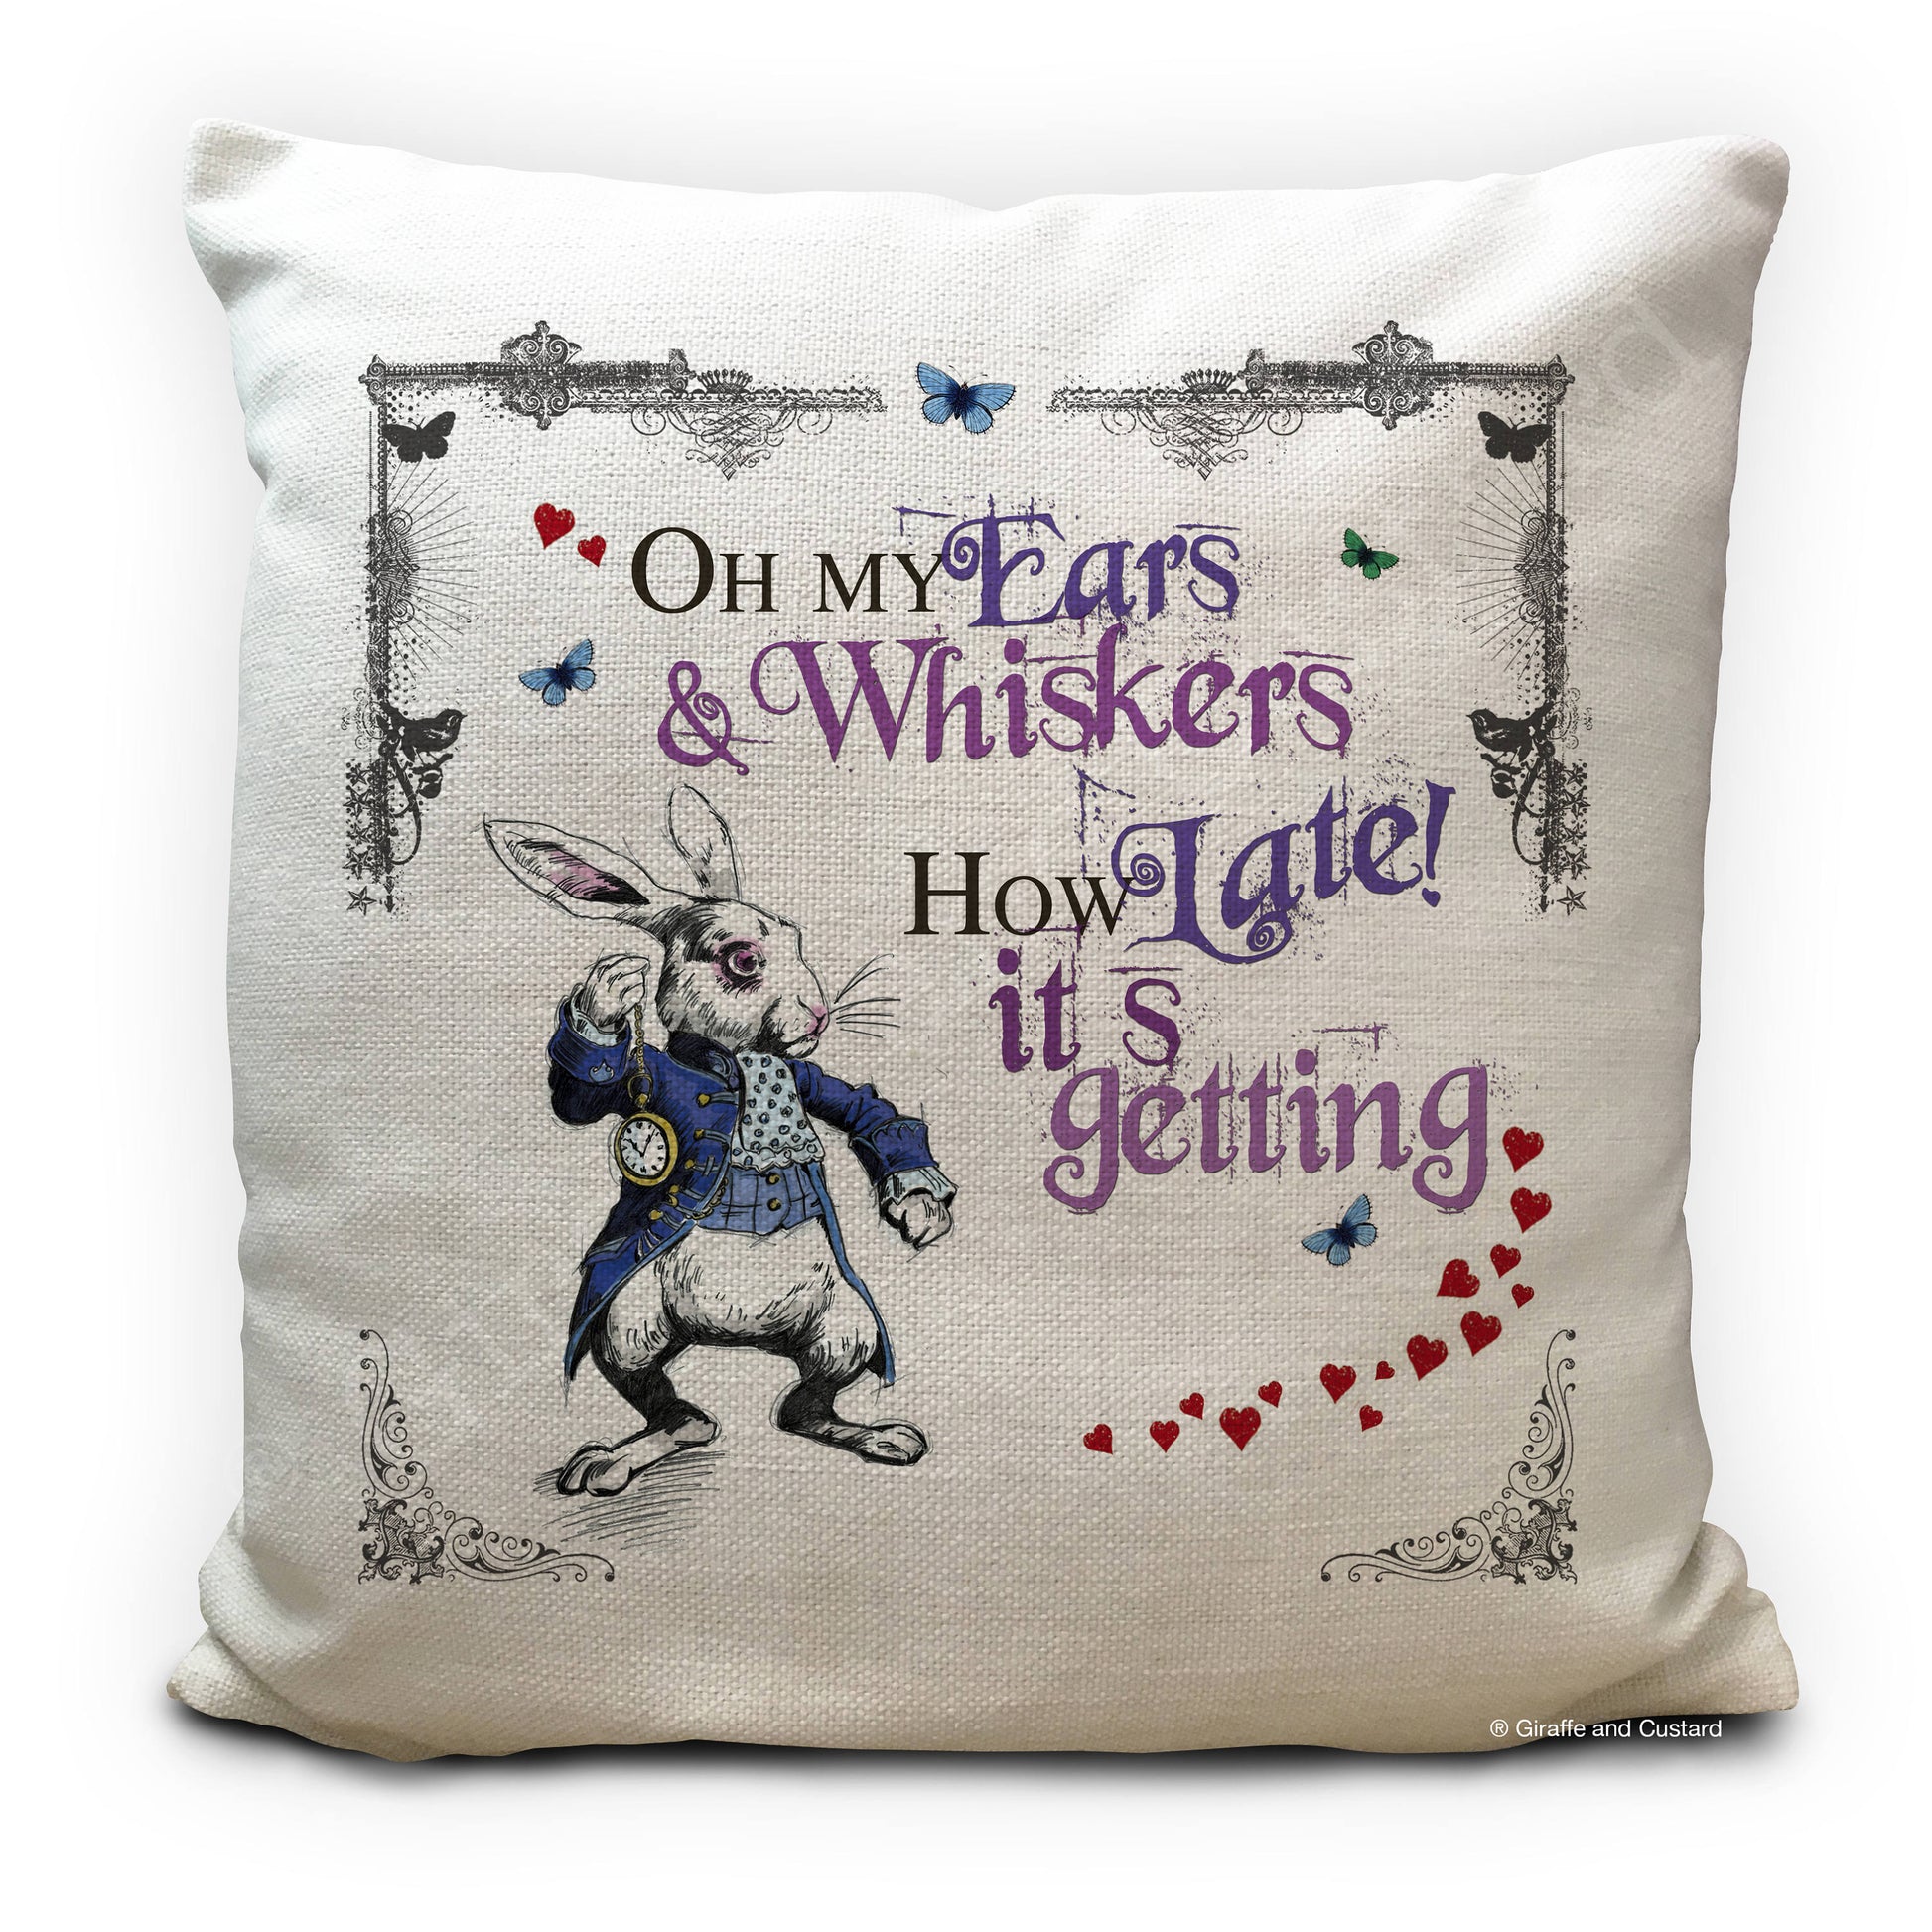 Alice in wonderland cushion cover with white rabbit i'm late quote